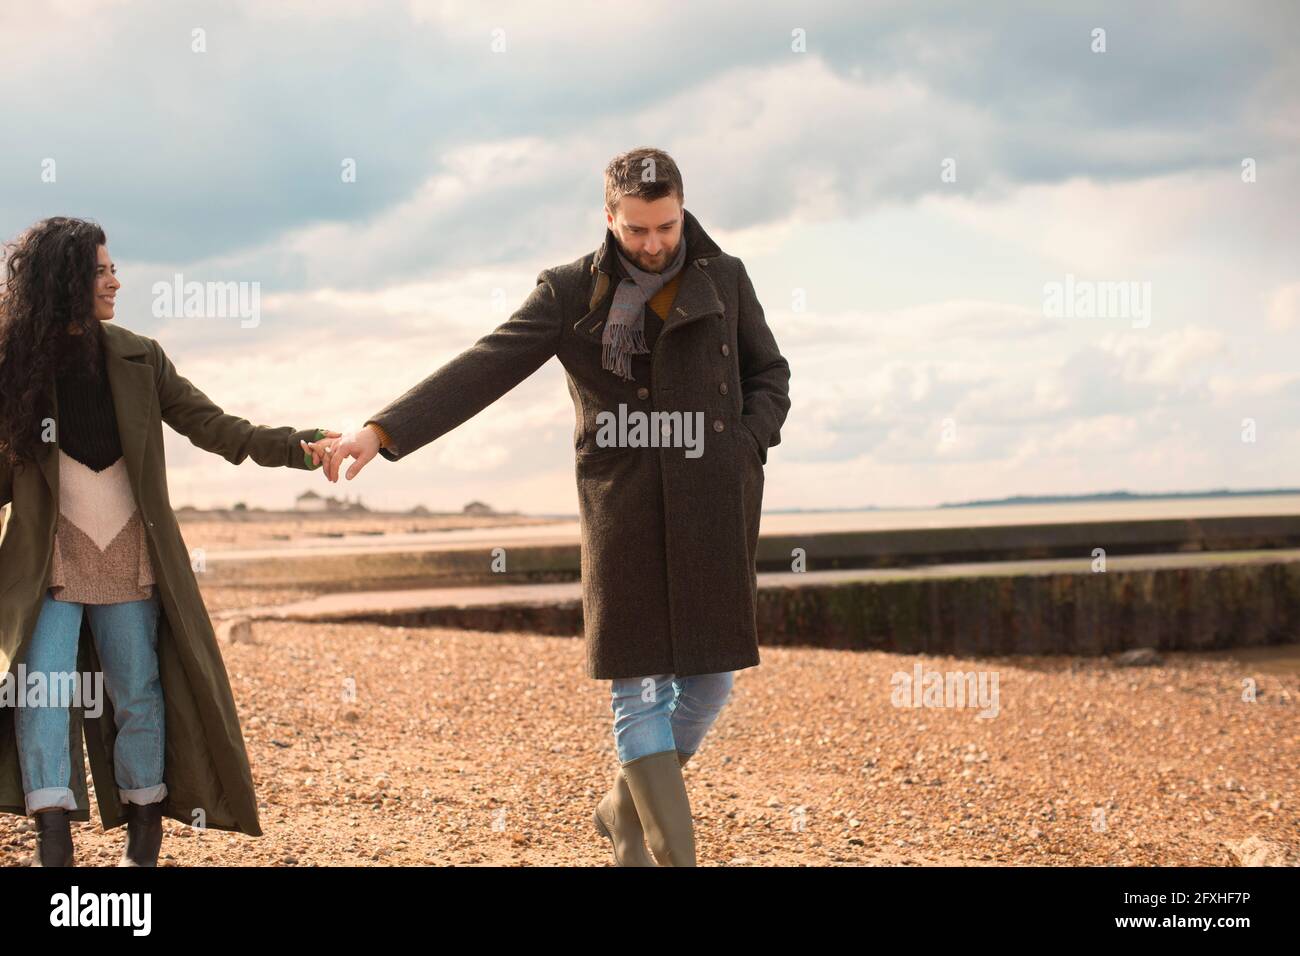 Couple in winter coats holding hands walking on sunny beach Stock Photo